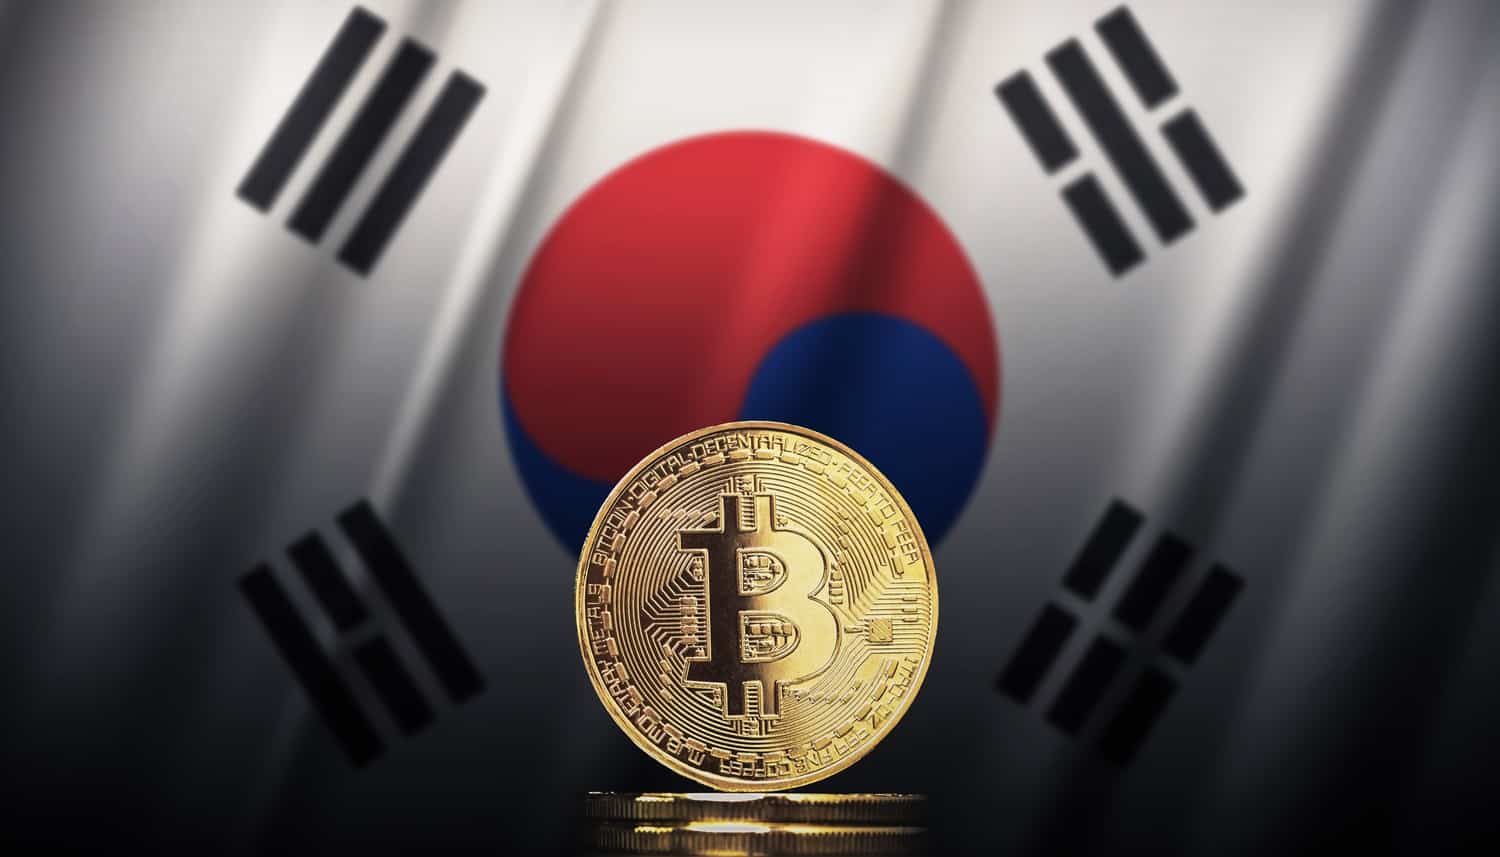 Tokens intended to represent Bitcoin against the backdrop of the national flag of South Korea.